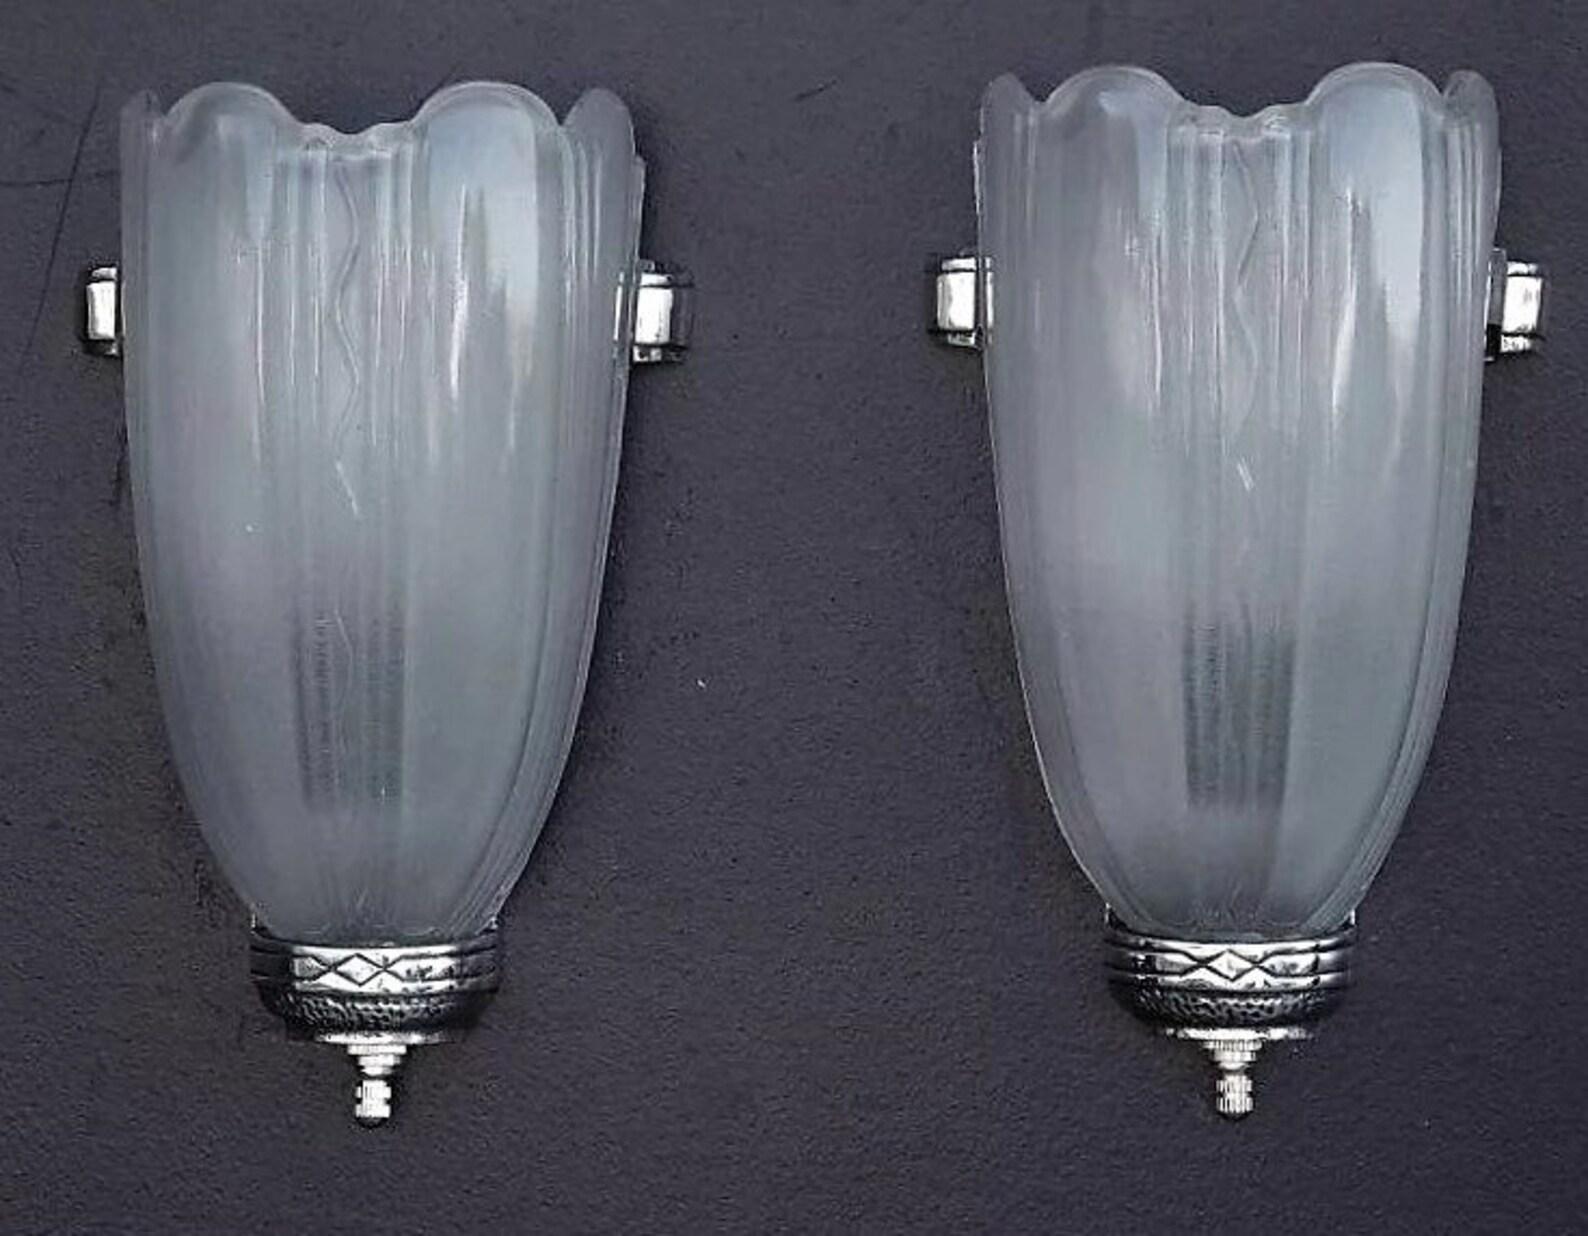 Priced for the pair with two pair available.
Art Deco style sconces. I can see them lighting the lobby in an old Art Deco theater in Miami. Highly polished aluminum backs with subtle yet dynamic Art Deco design. Note the highly reflective glossy